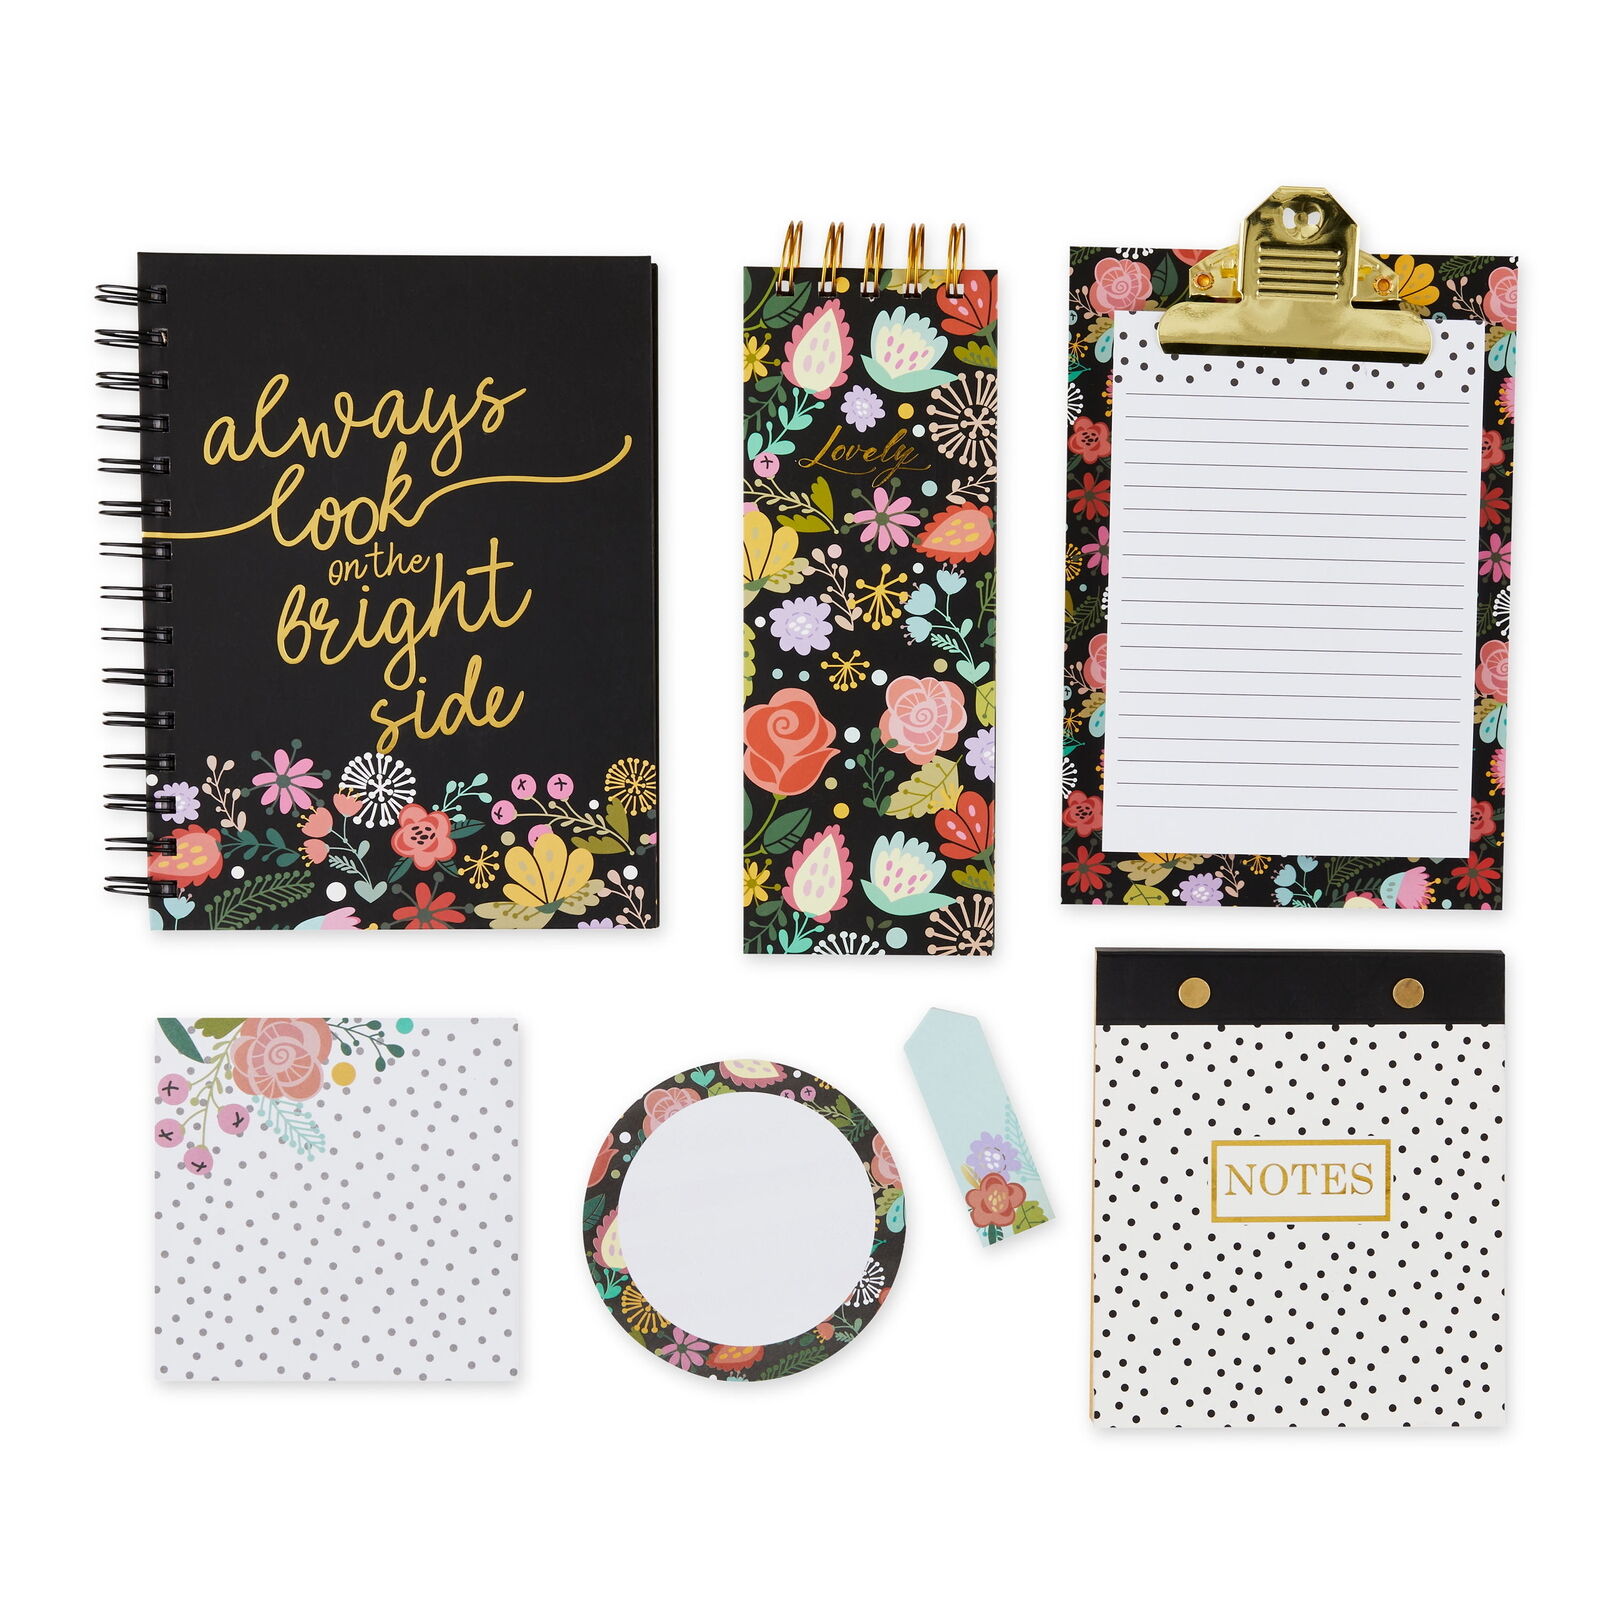 Pen+Gear Stationery Gift Sets, Black Ditsy Floral, Ruled Paper, Journal, Notepad